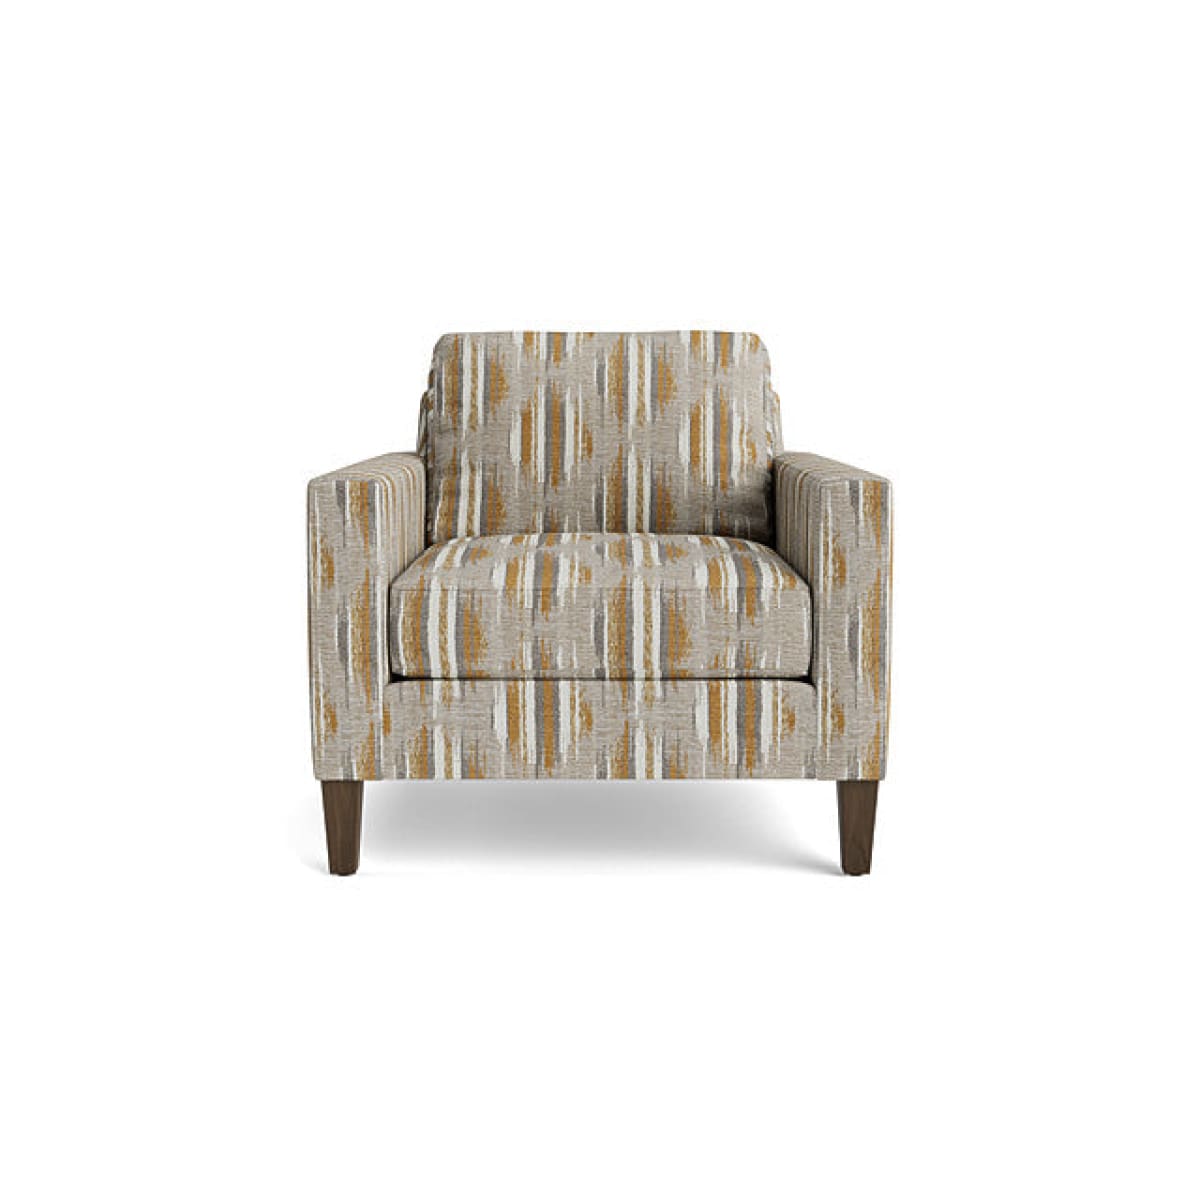 Kent Accent Chair - Kenzo Harvest